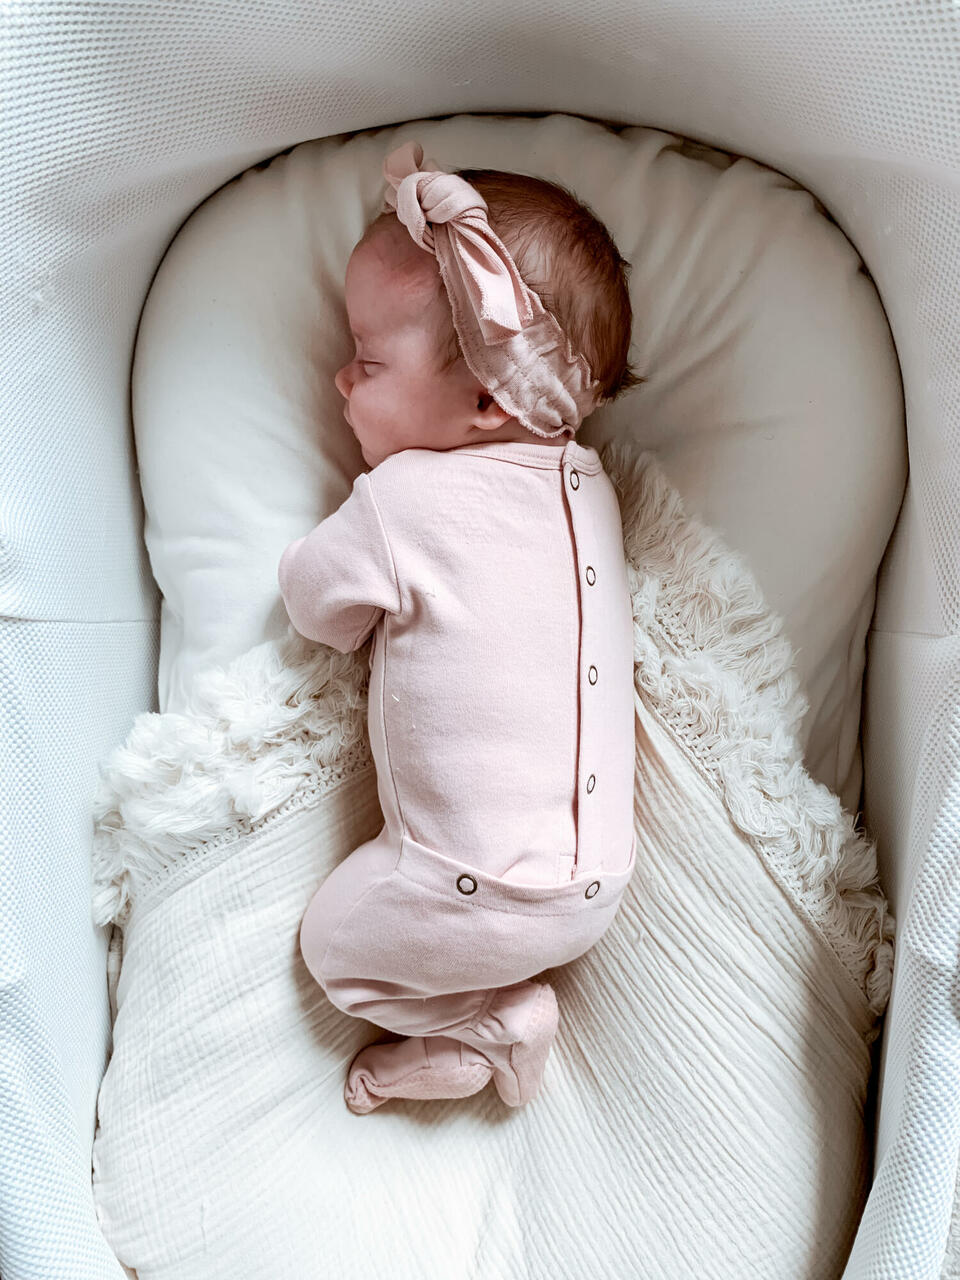 V-Neck Baby Footie in Rosewater, Lifestyle
@sarahkilver